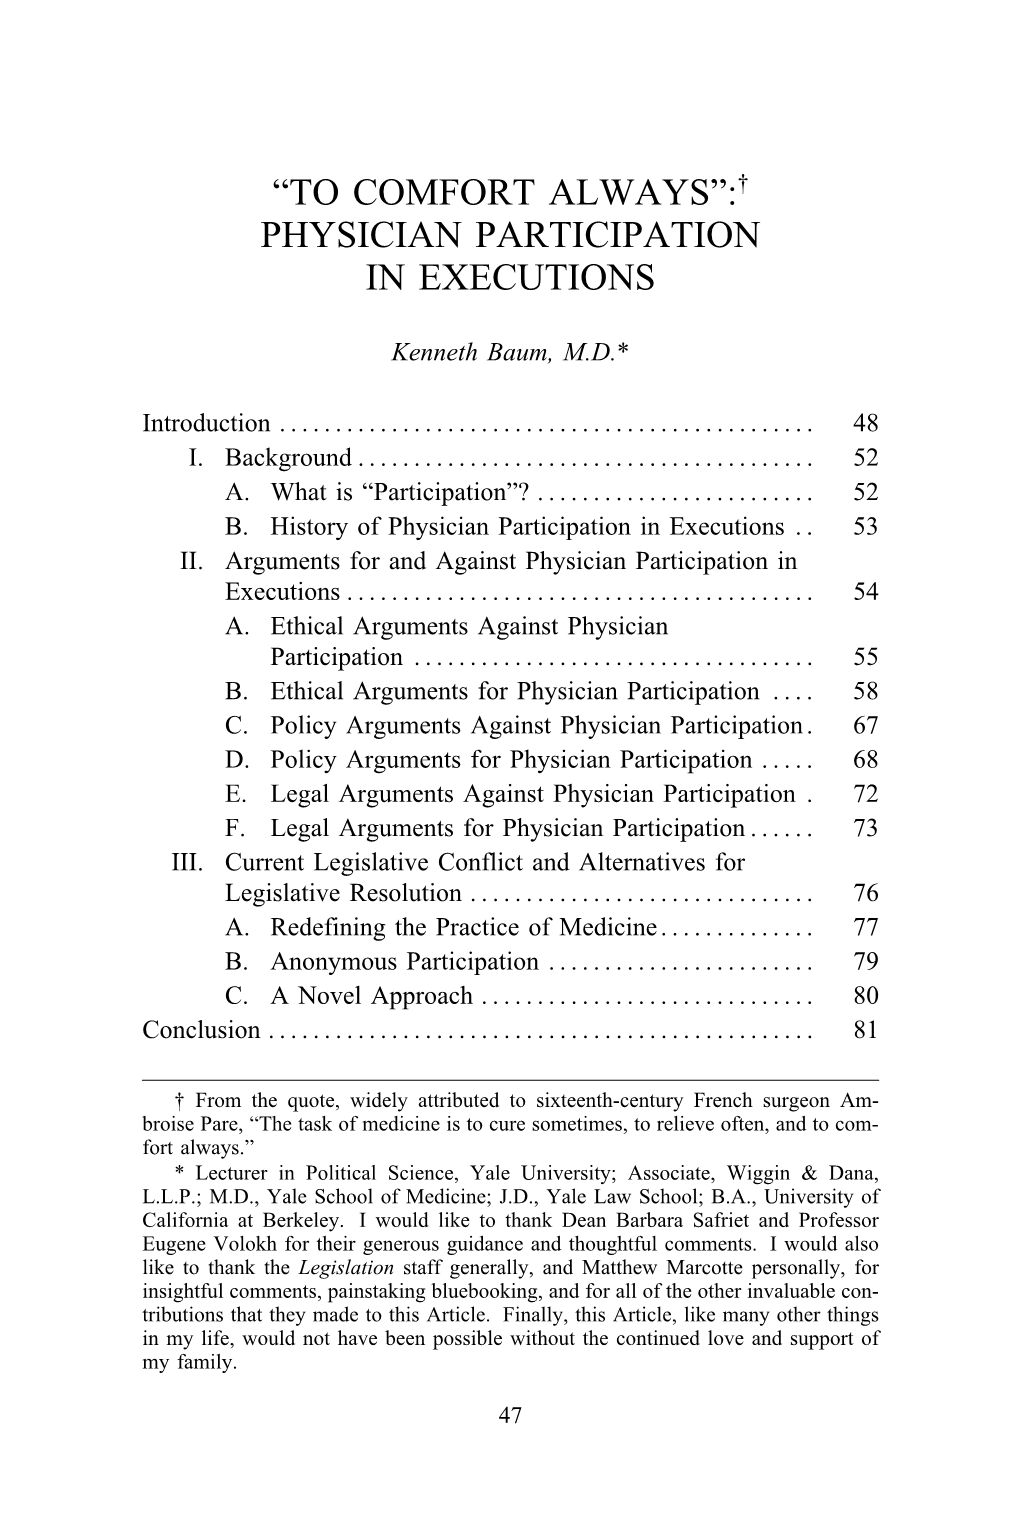 Physician Participation in Executions